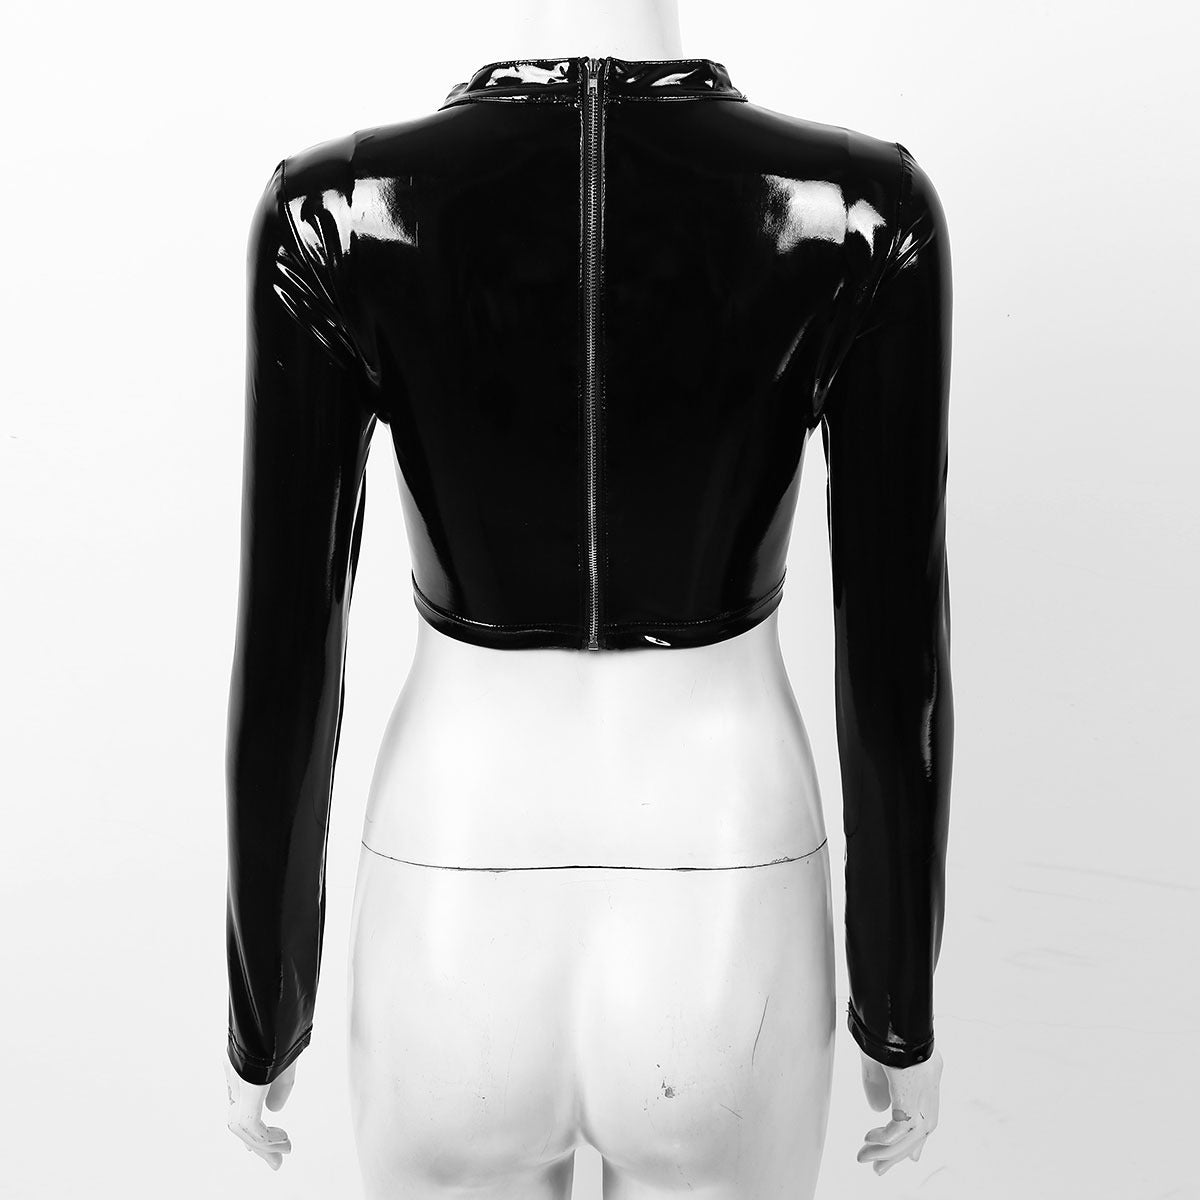 Women's Wet Look Fashion Tops / Patent Leather Hollow Out Front with Buckles Gothic Crop Top - HARD'N'HEAVY